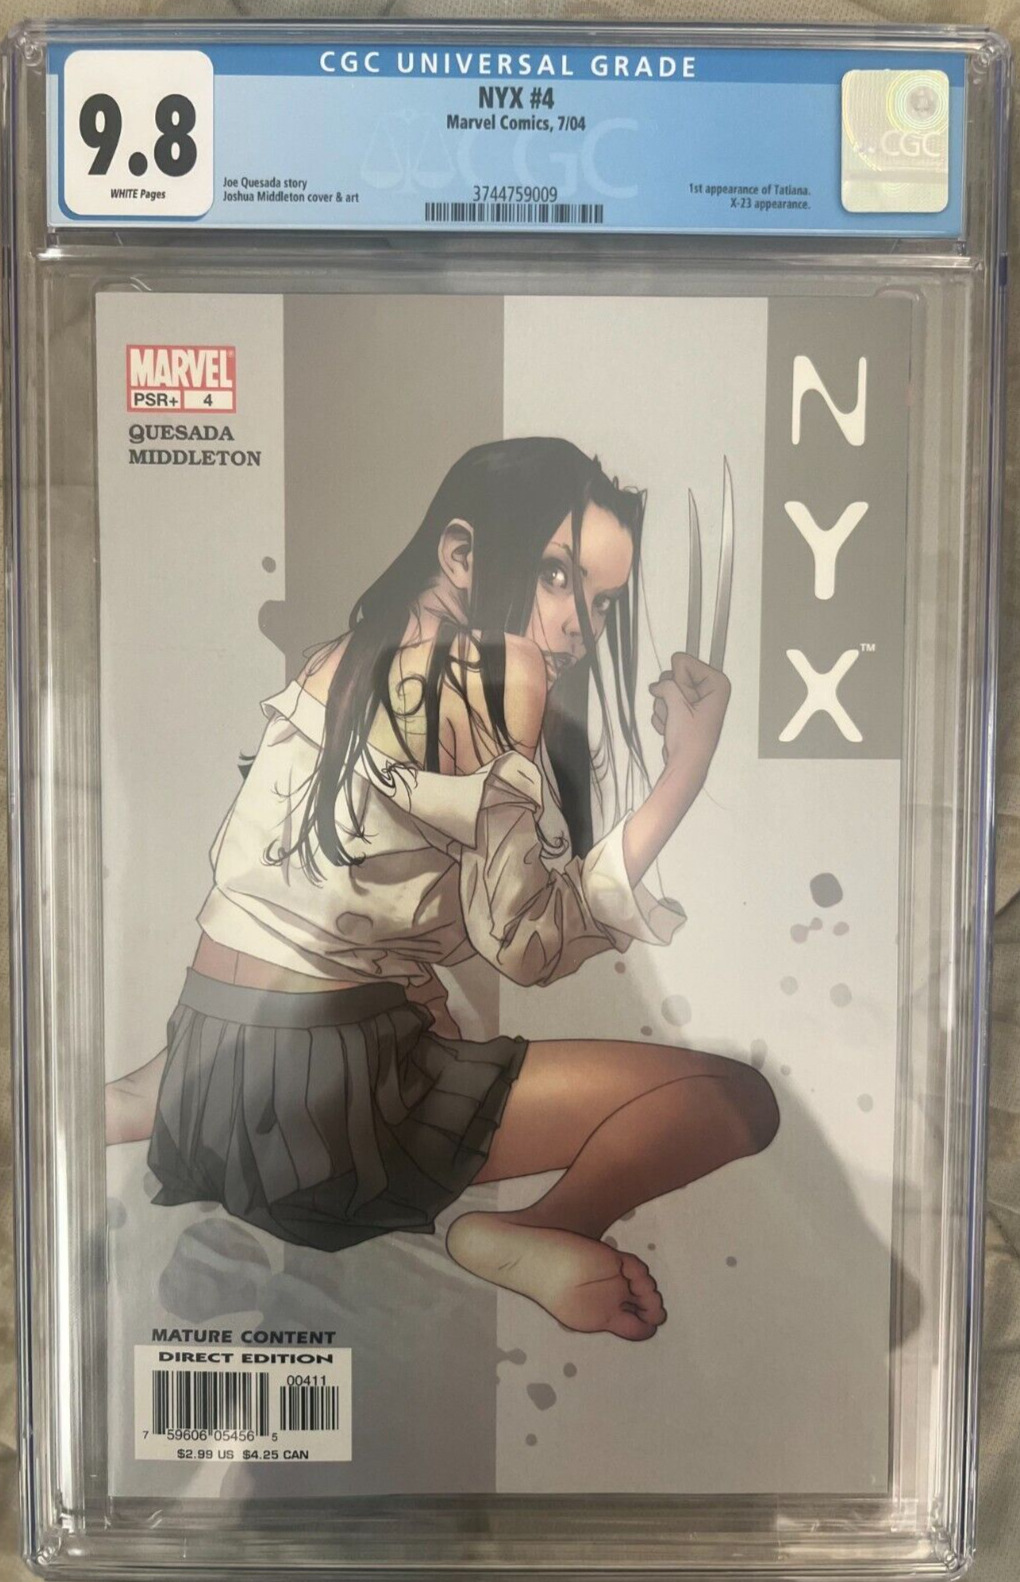 NYX #4 | 2nd Appearance of X-23 Laura Kinney |